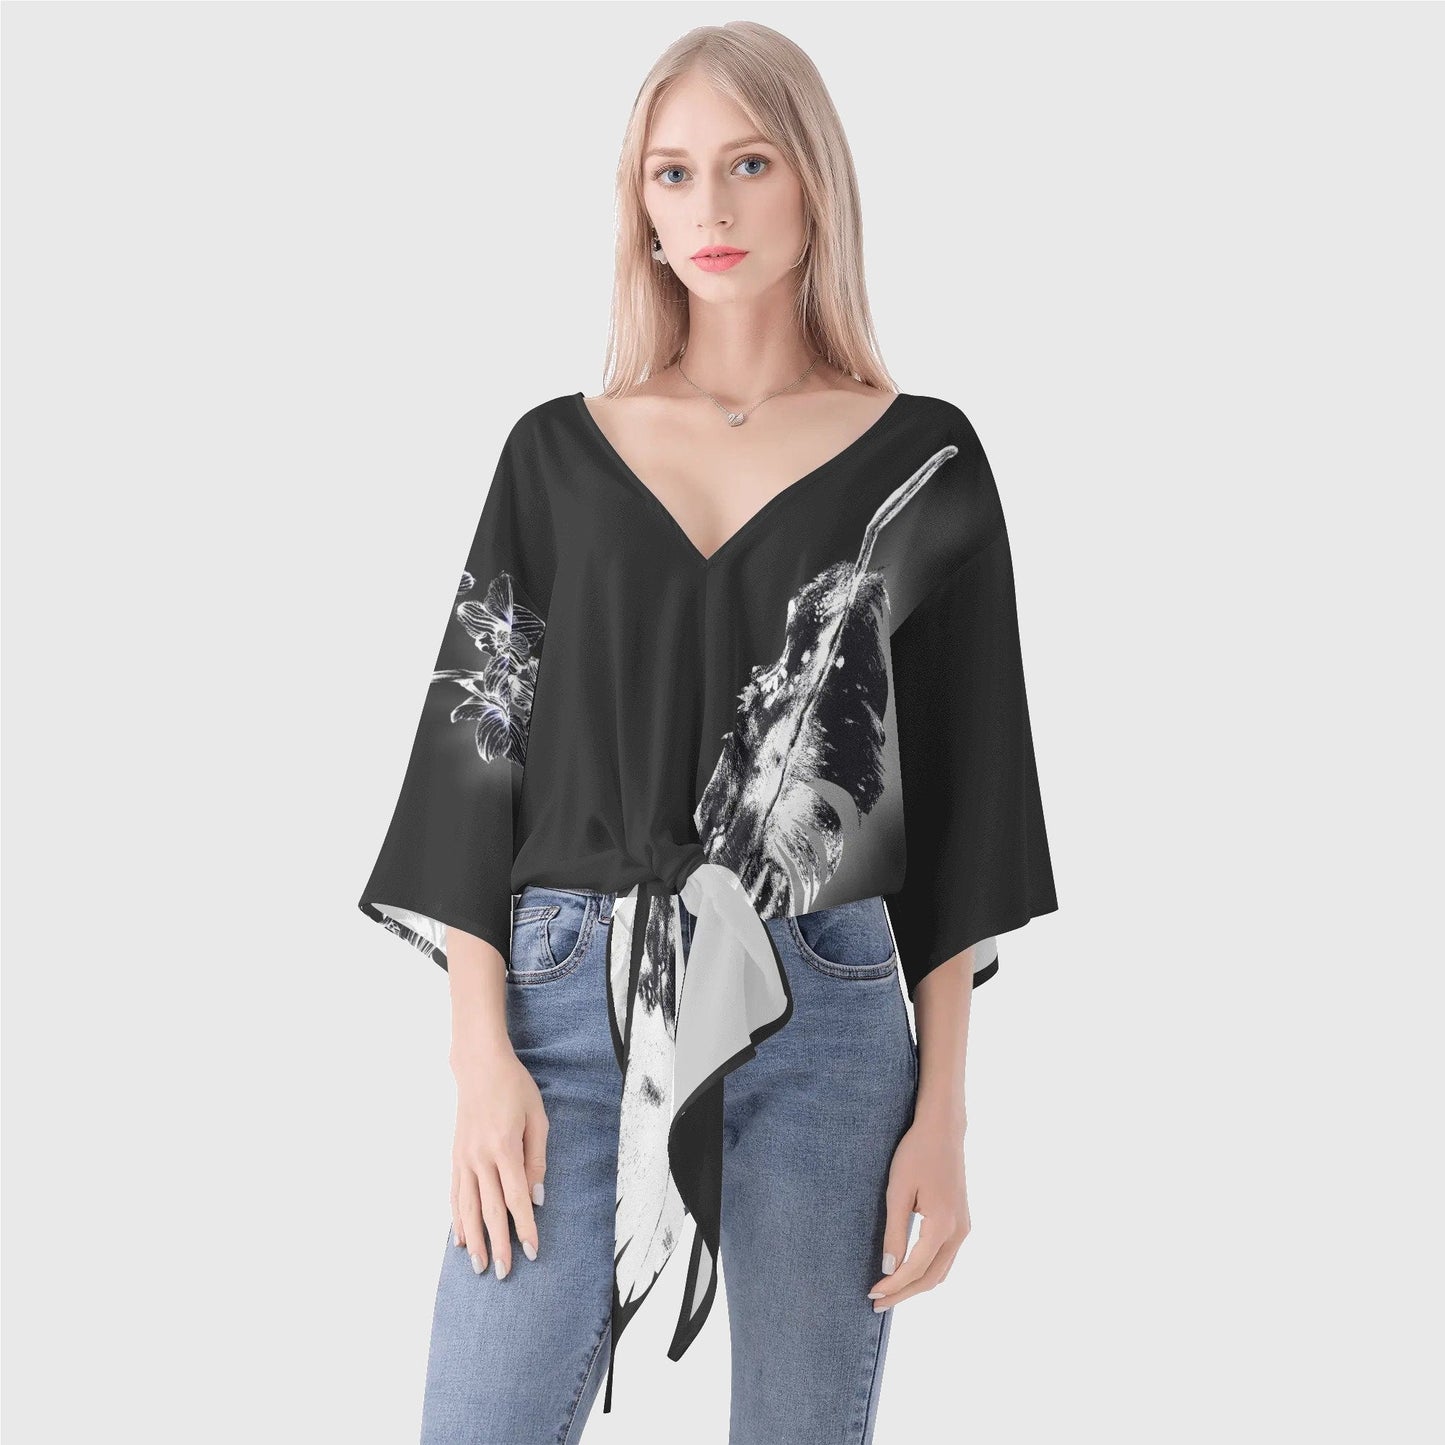 inverted*deep*grey*indigenous*native*american*eagle*feather*orchid*knot*blouse*women's